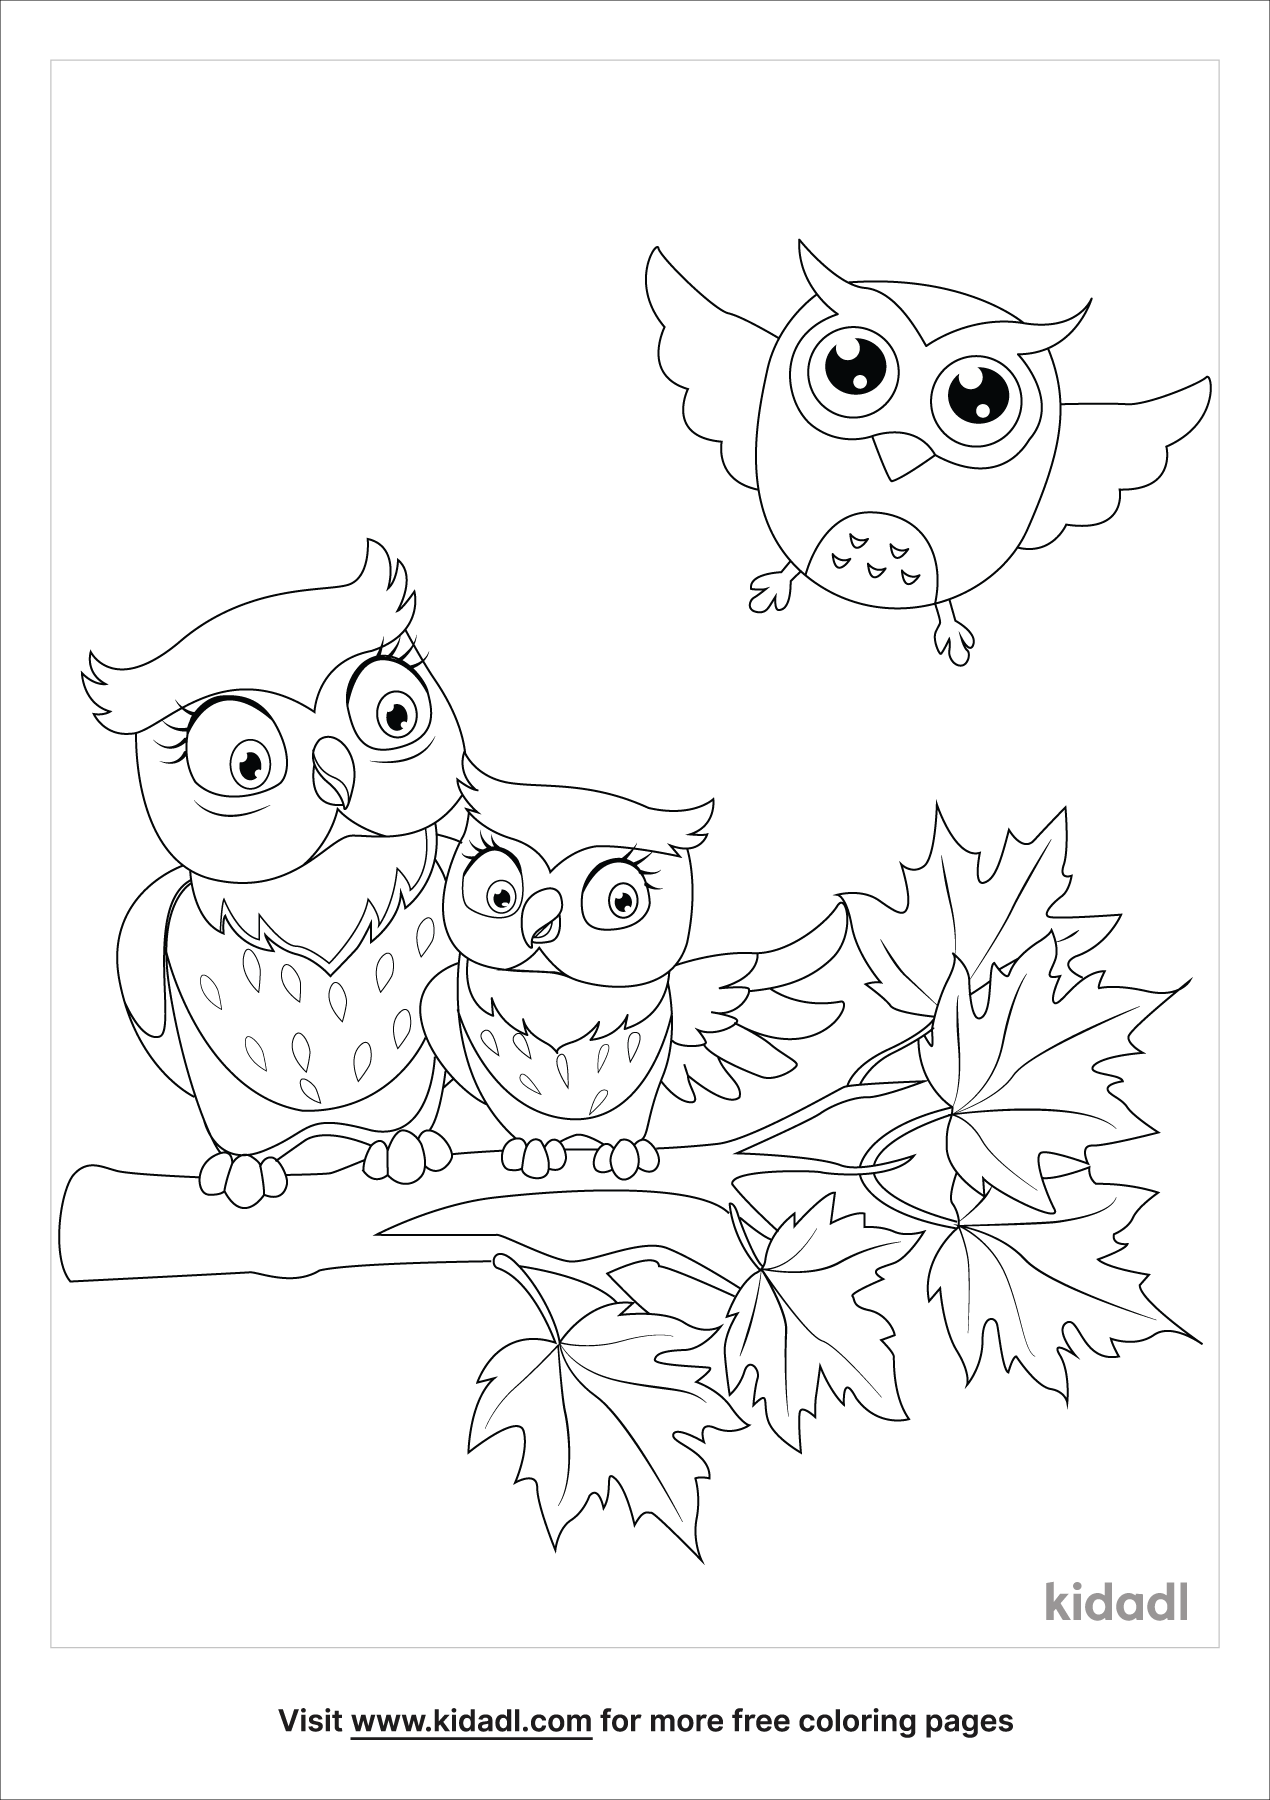 Owl And Babies Coloring Pages | Free Birds Coloring Pages | Kidadl